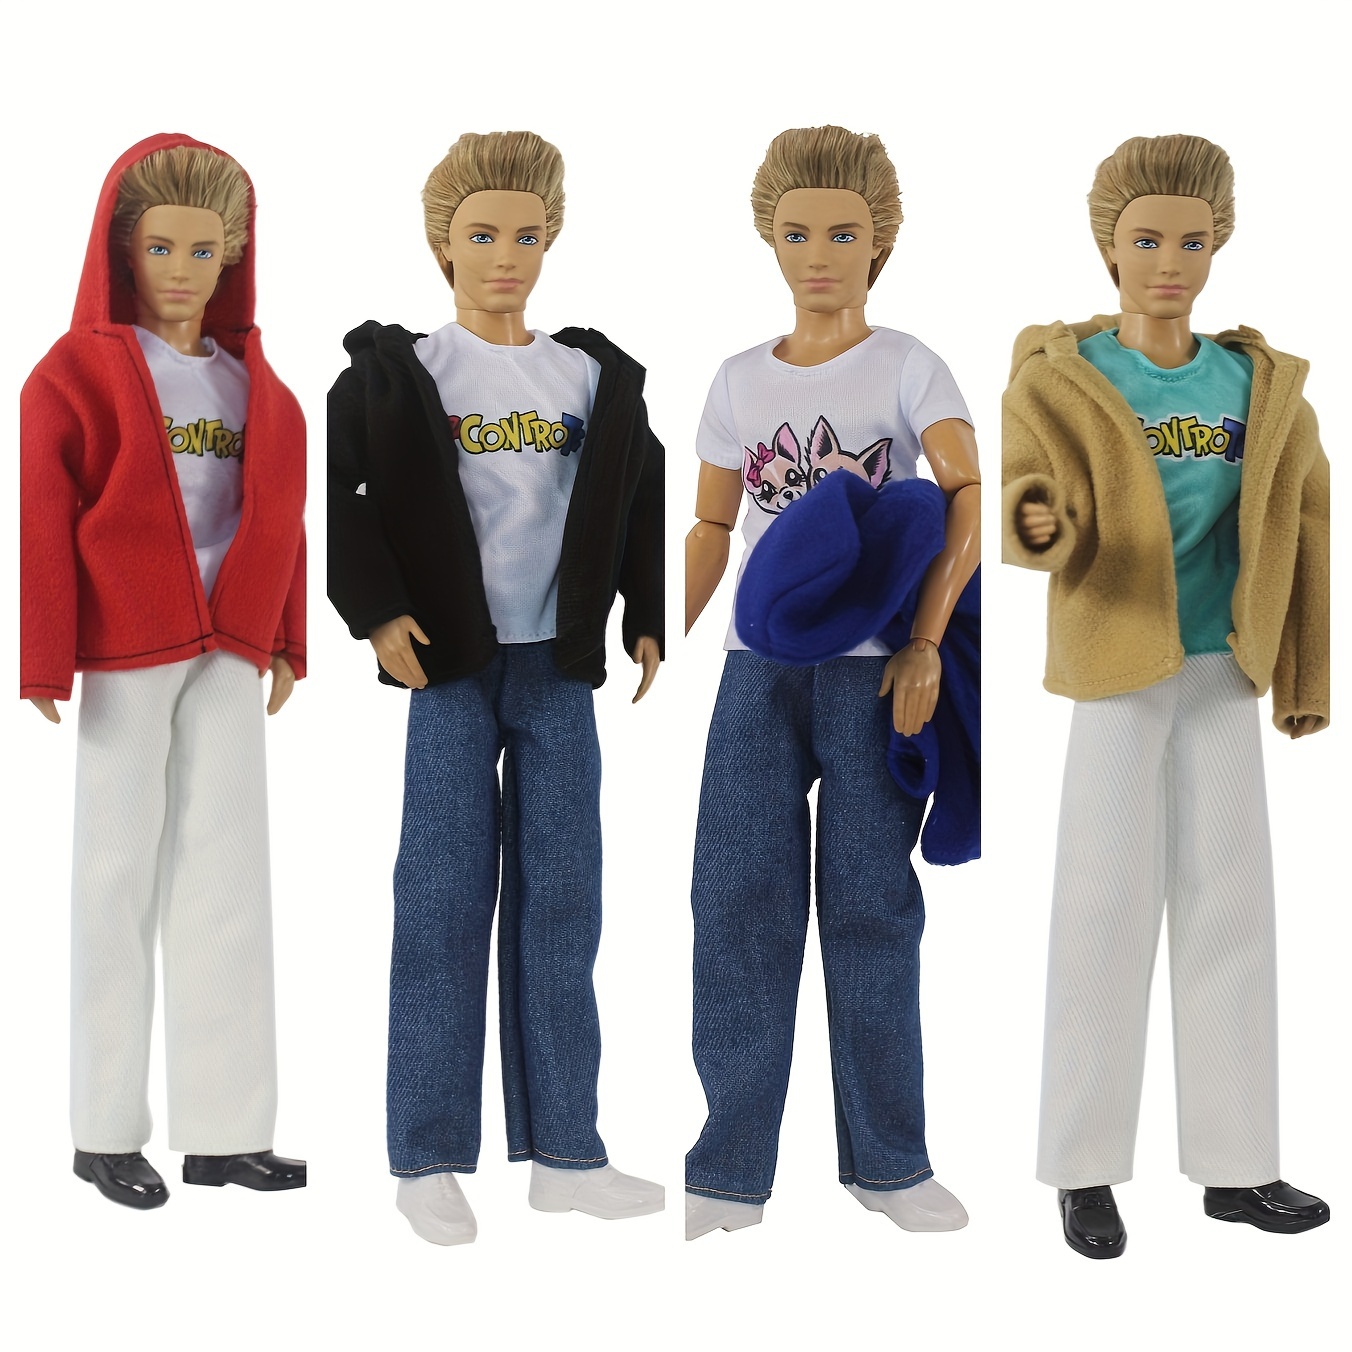 1/6 Boy Doll Clothes For Ken Doll Shirt & Black Trousers Pants